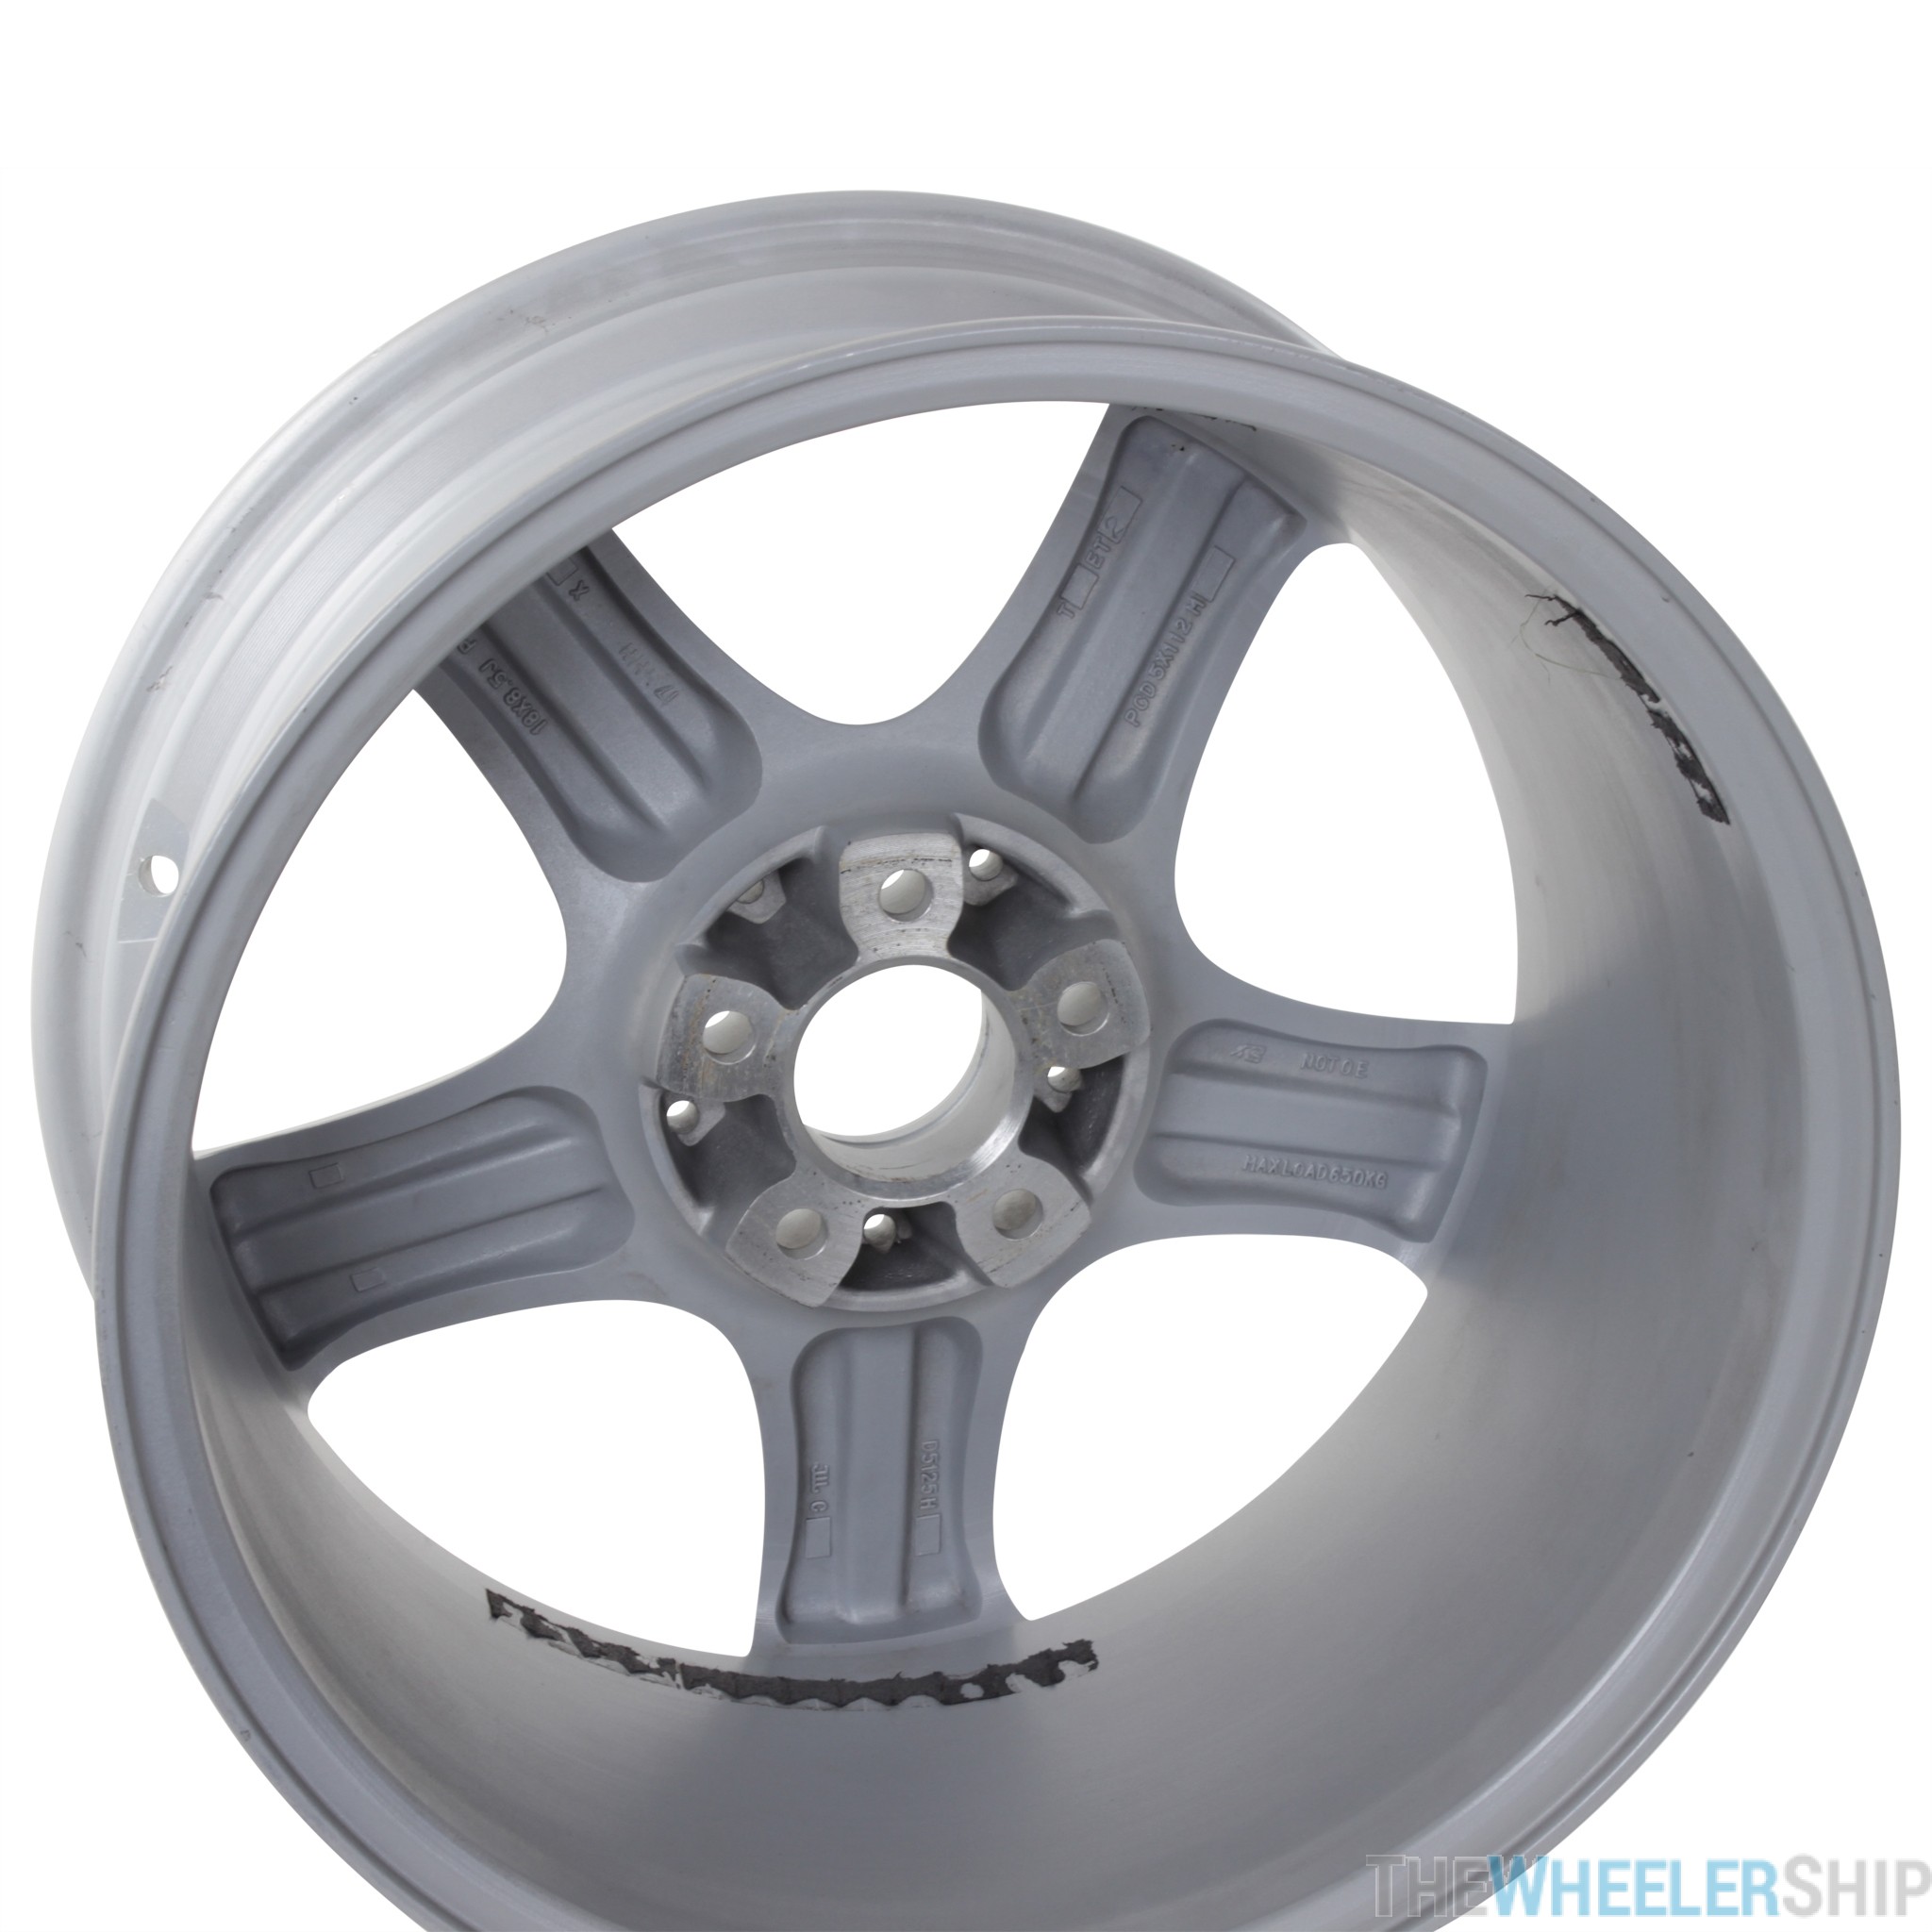 Brand New 18 x 8.5 Replacement Wheel for Mercedes CLS500 CLS550 2006-2007 Rim 65371 